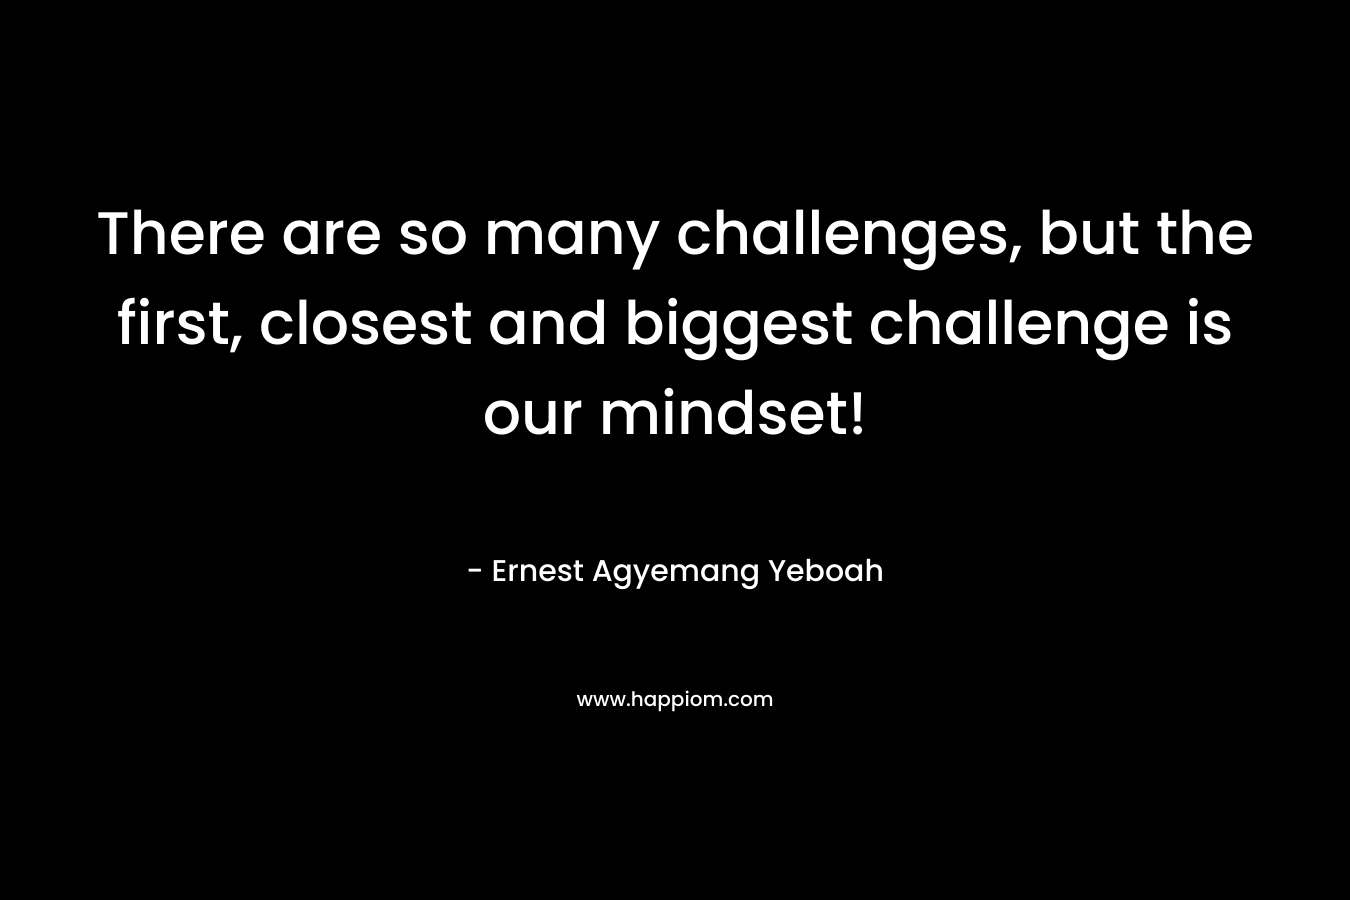 There are so many challenges, but the first, closest and biggest challenge is our mindset! – Ernest Agyemang Yeboah